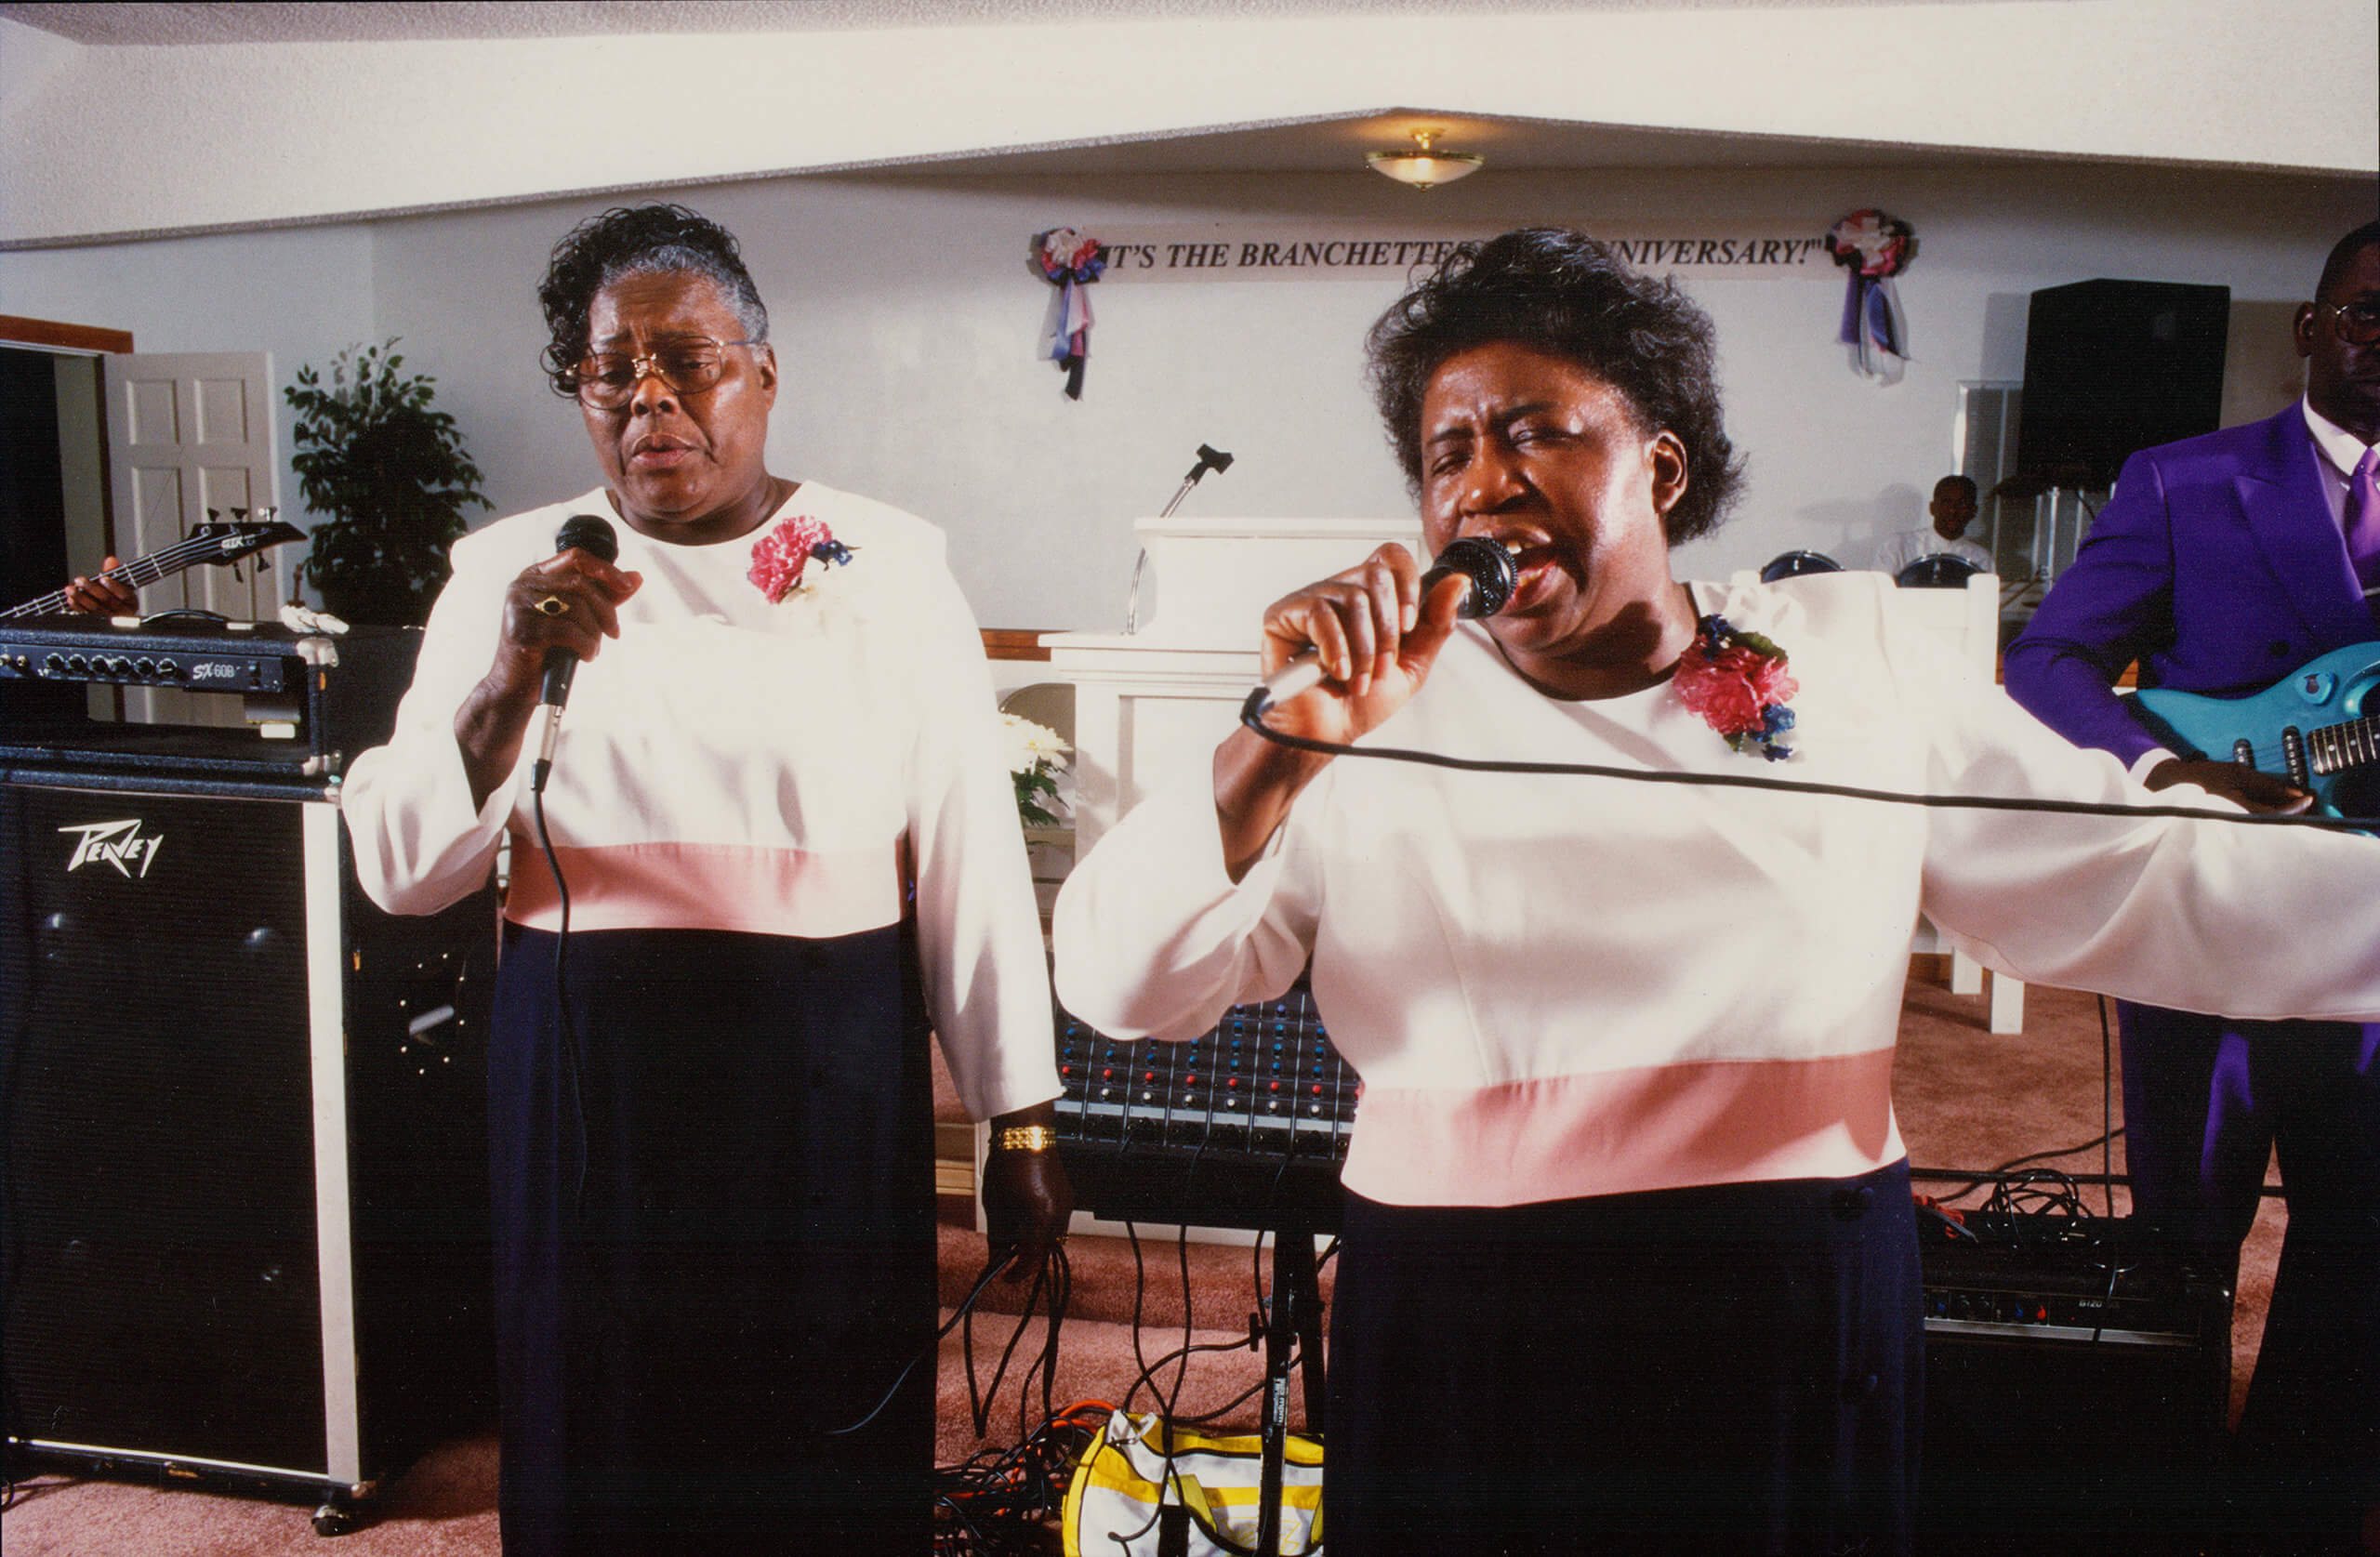 Ethel Mae Elliot, left, and Lena Mae Perry, right, perform at The Branchettes 23rd Anniversary in 1996, Long Branch Disciples of Christ, New Grove, North Carolina. Photo by Roland L. Freeman, from the documentary film STAY PRAYED UP.